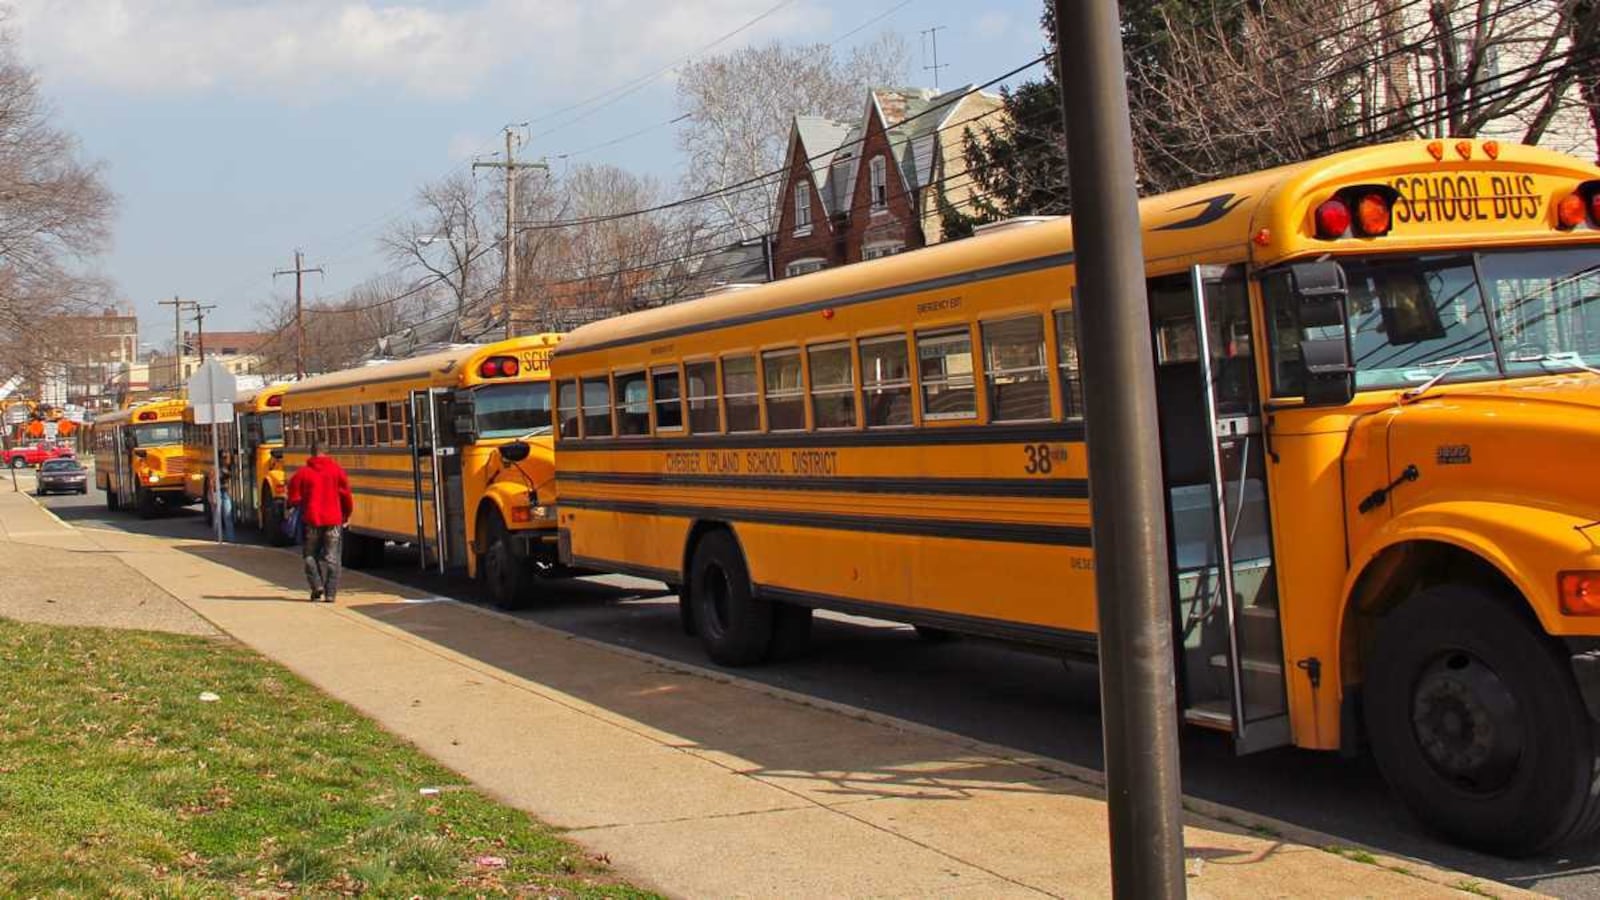 A line of yellow school buses.